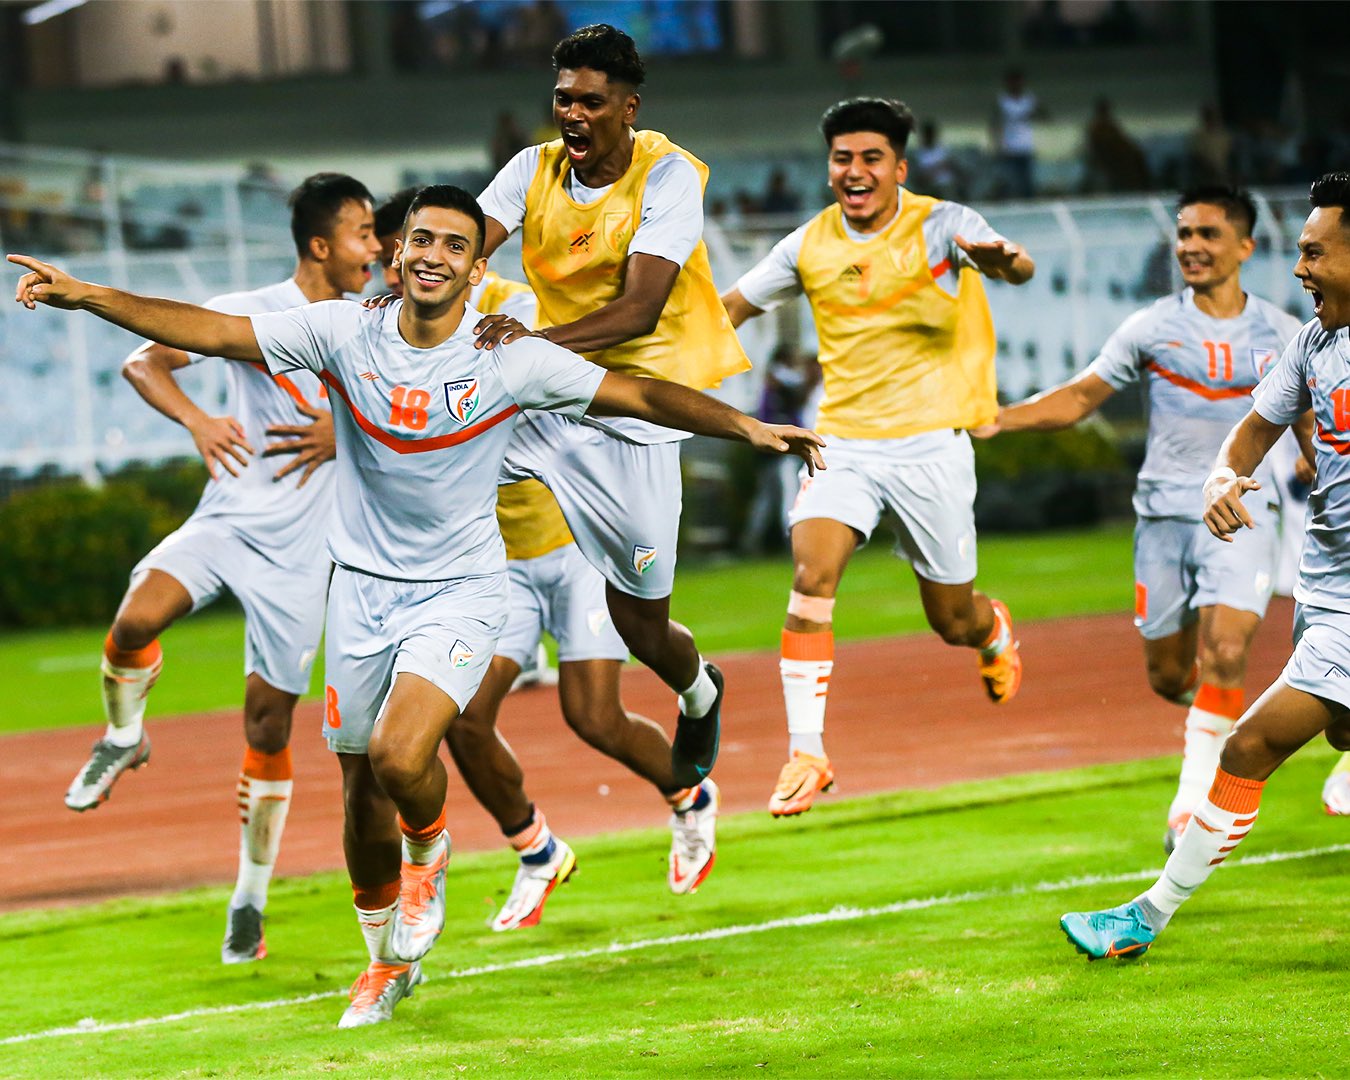 AFC Asian Cup Qualifiers LIVE: India AIMS all 3 Points against Hong Kong in Final Match of Group Stage - Follow AFC Asian Cup Live Streaming